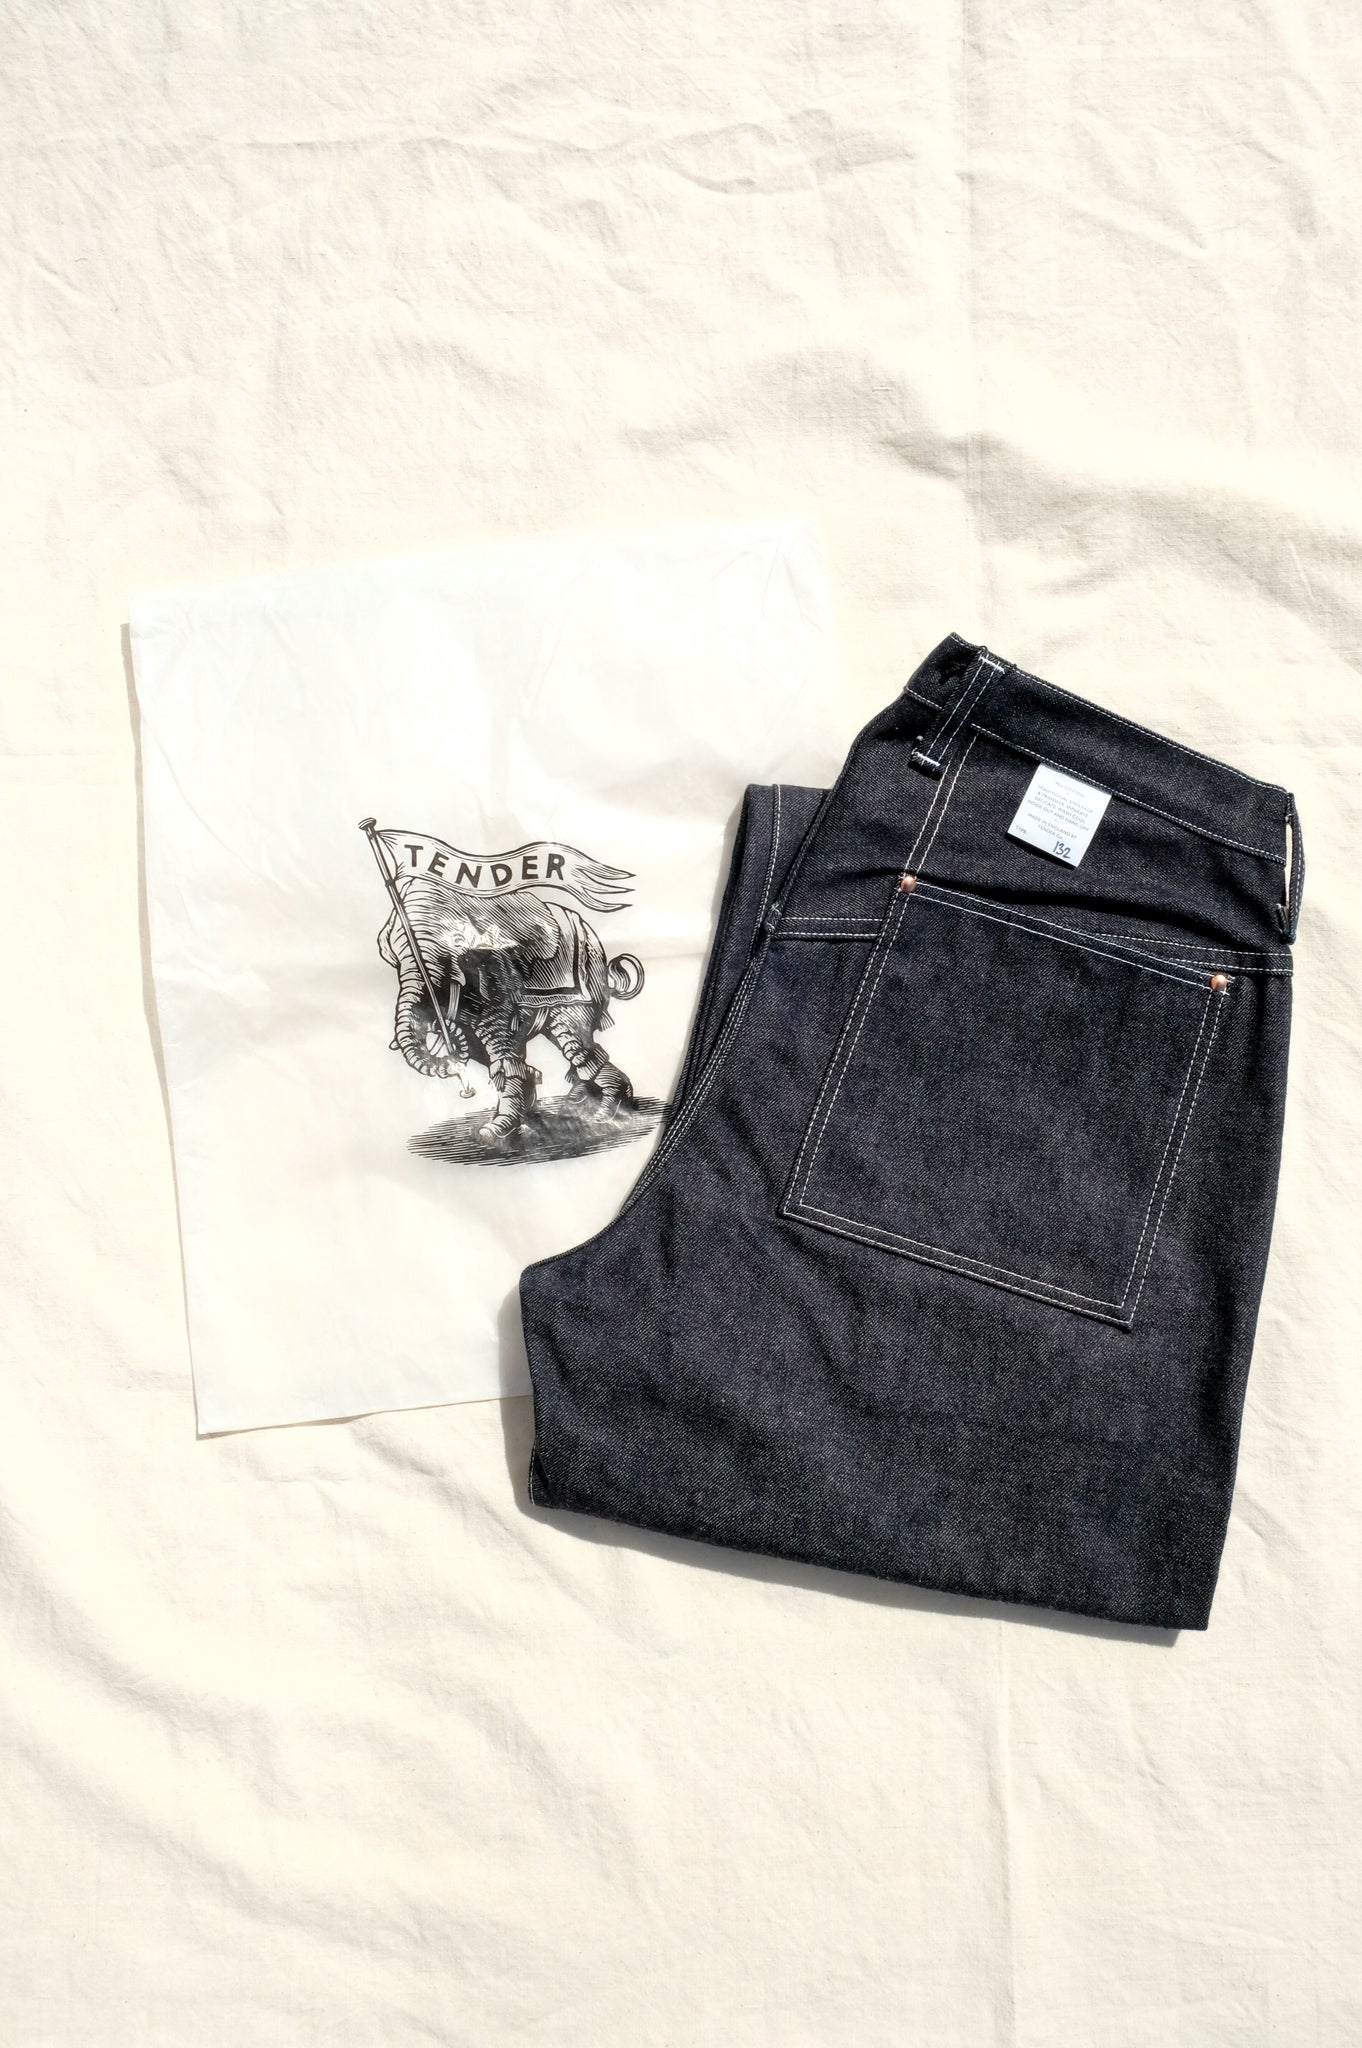 TENDER Co.  "TYPE132 WIDE JEANS  / RINSE"